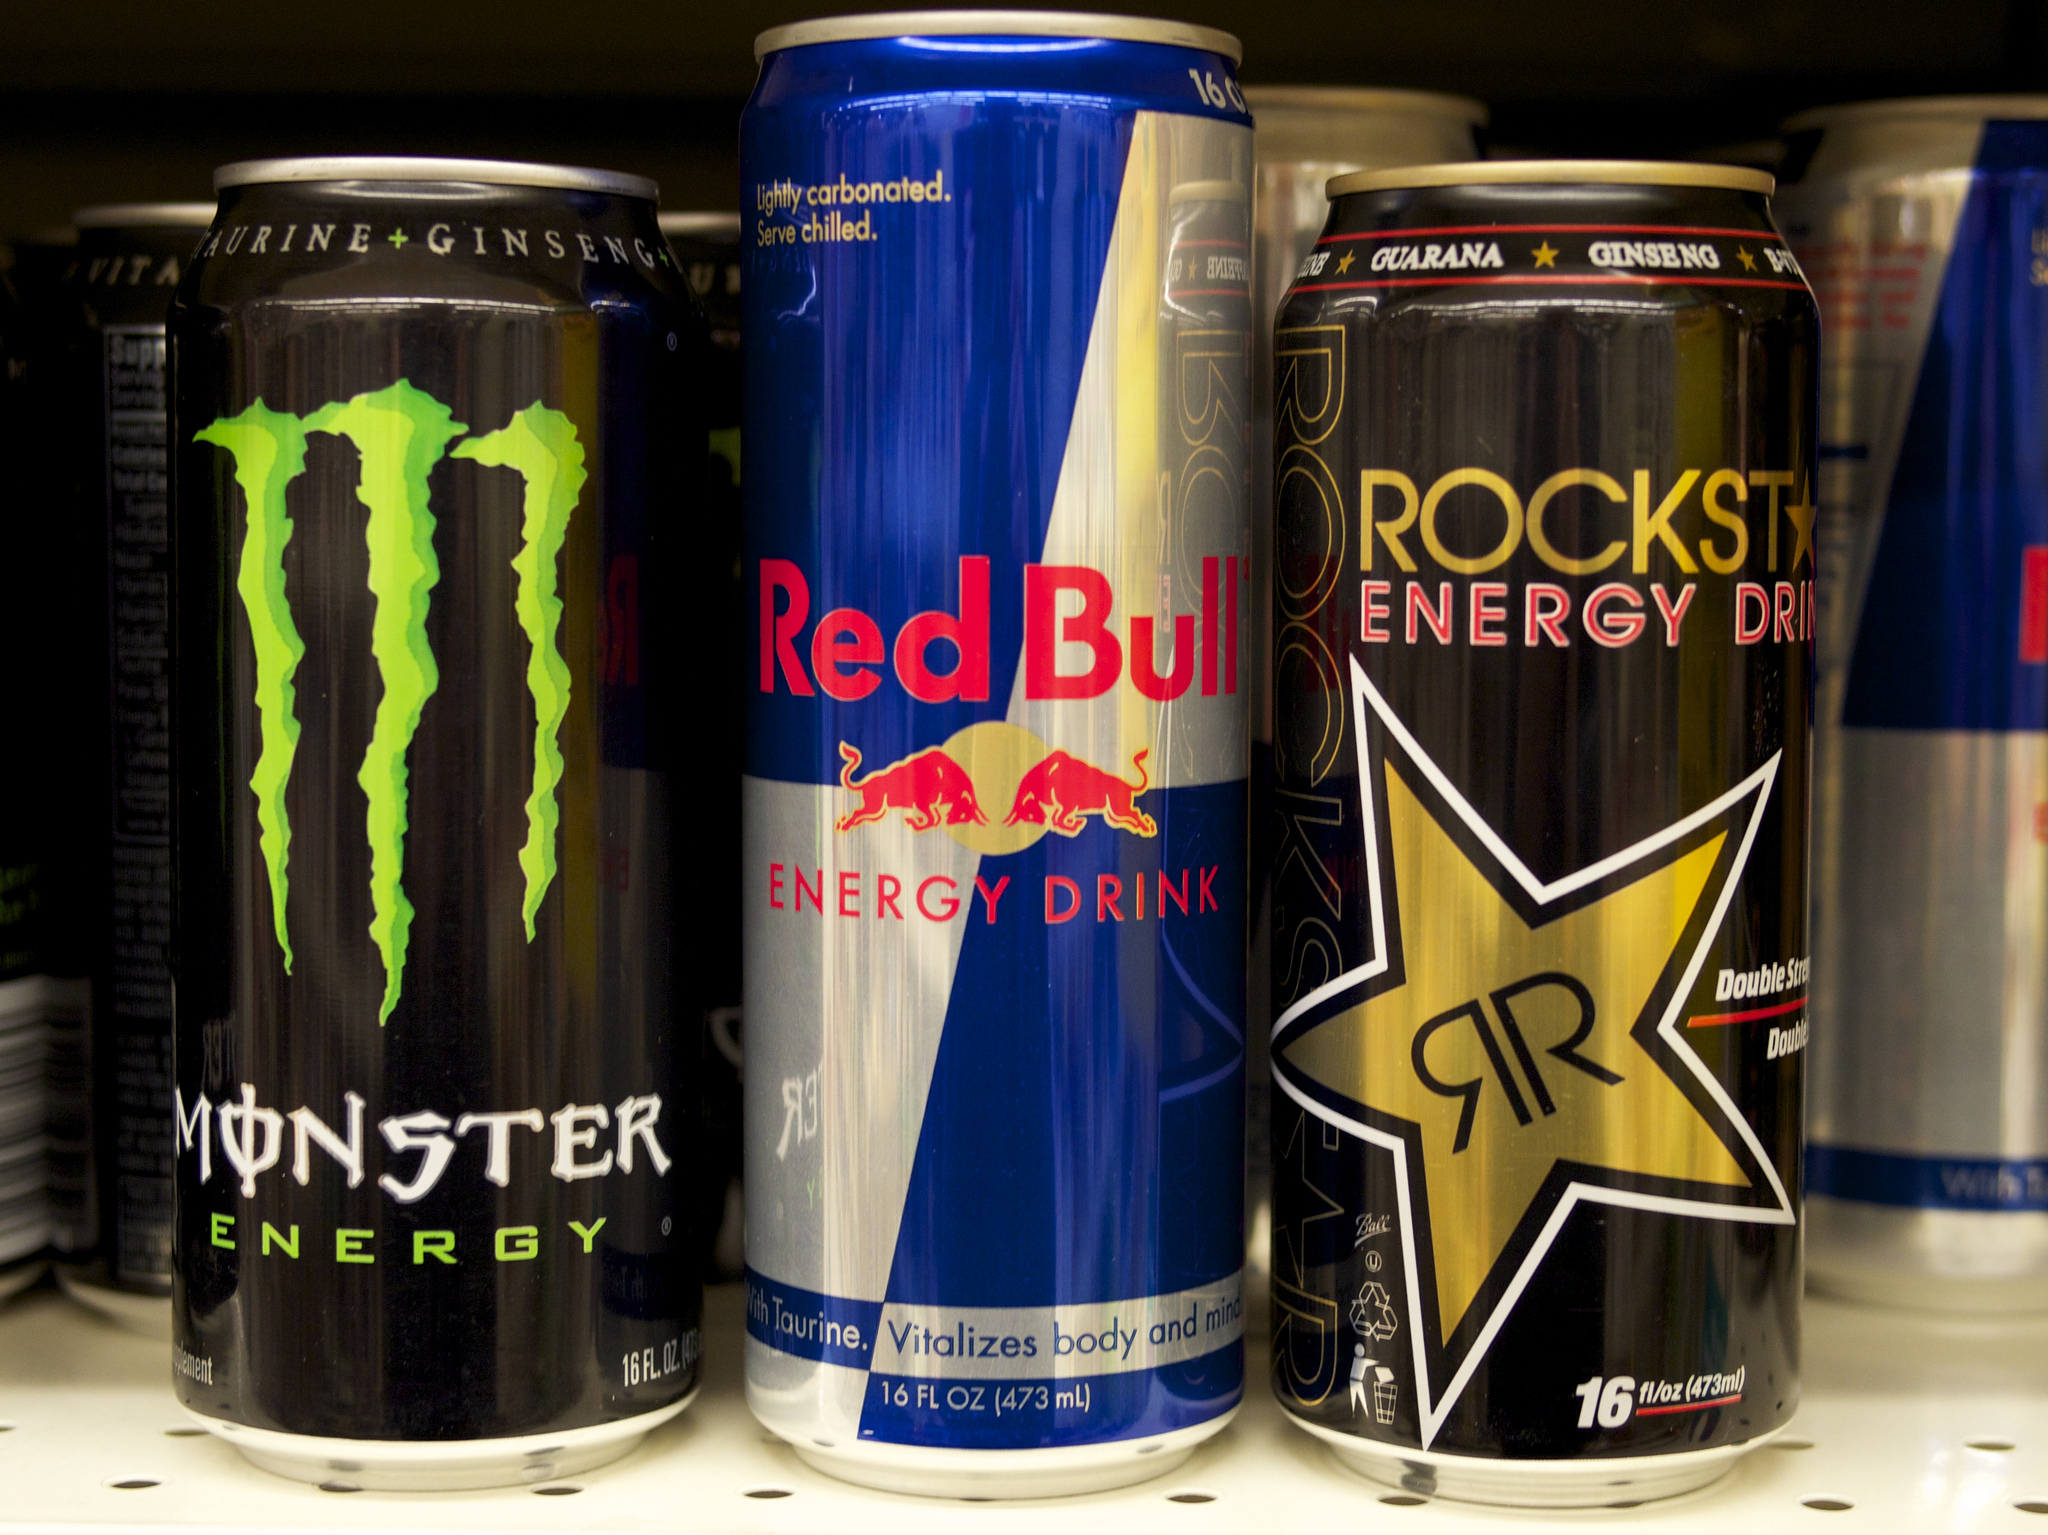 Energy Drink Side Effects Pose Public Health Risk: - AboutLawsuits.com